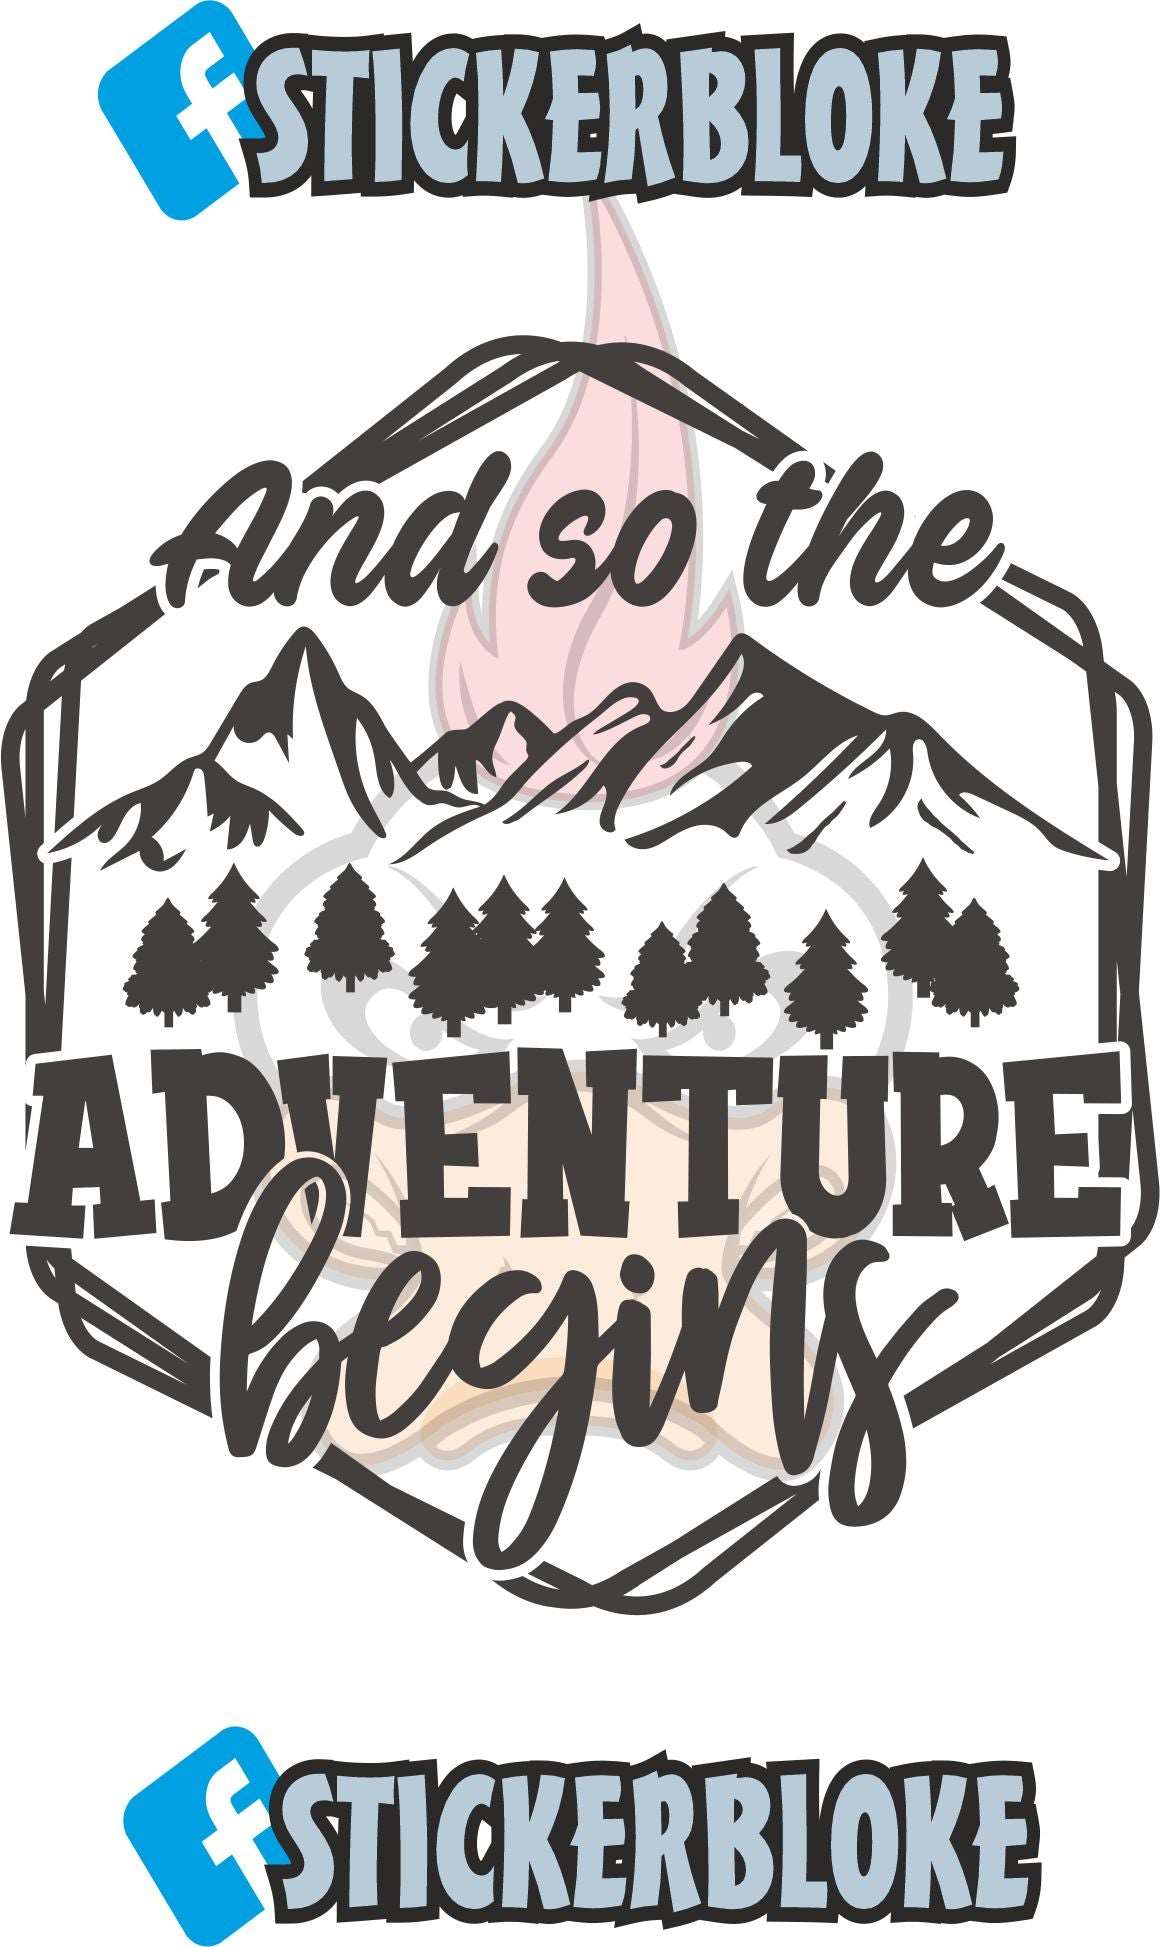 AND SO THE ADVENTURE BEGINS STICKER